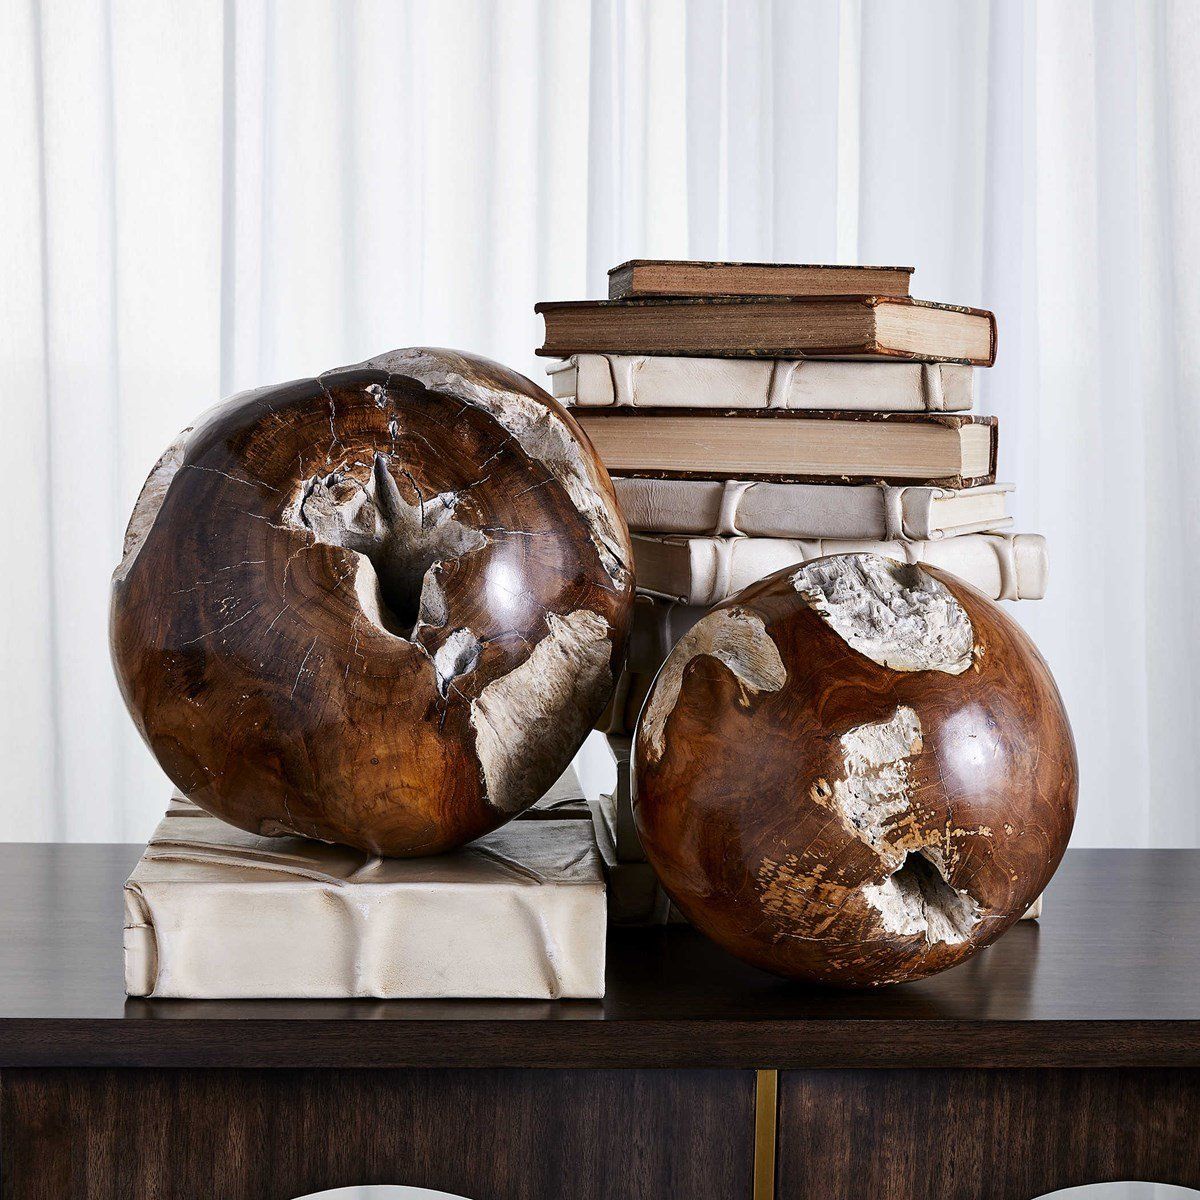 Reclaimed teak wood balls give a retro feel with their geometric shapes